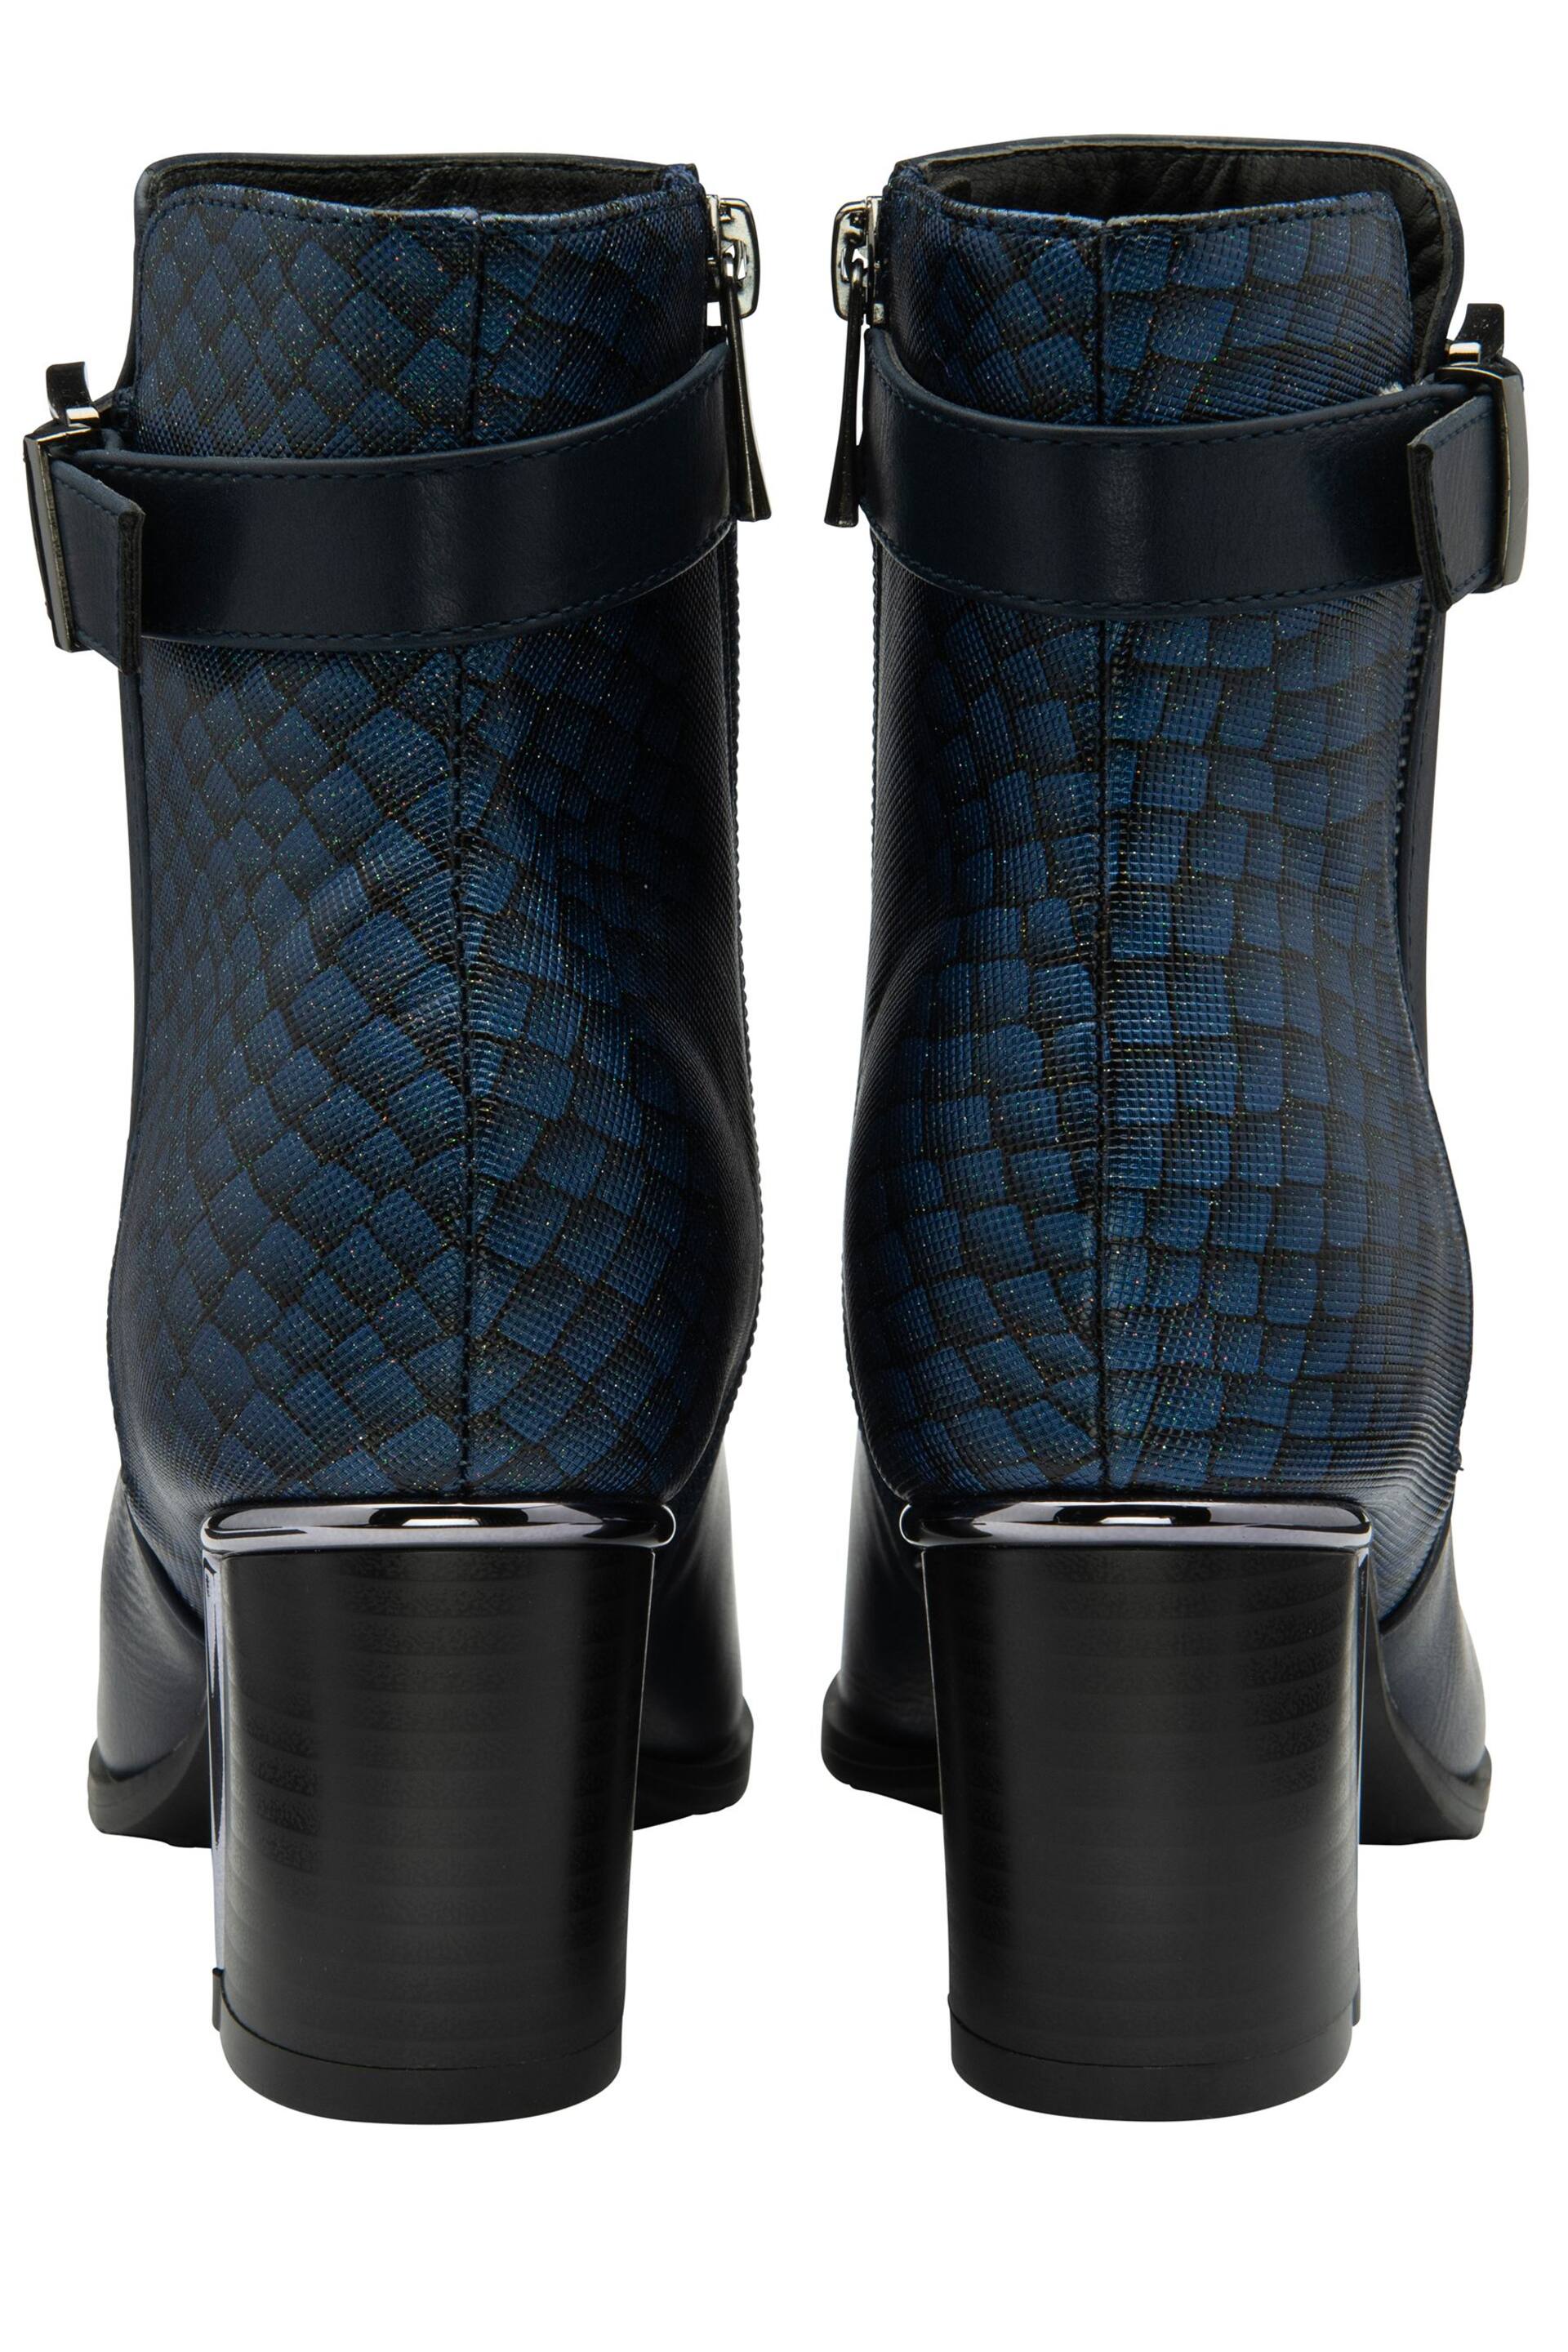 Lotus Navy Blue Ankle Boots - Image 3 of 4